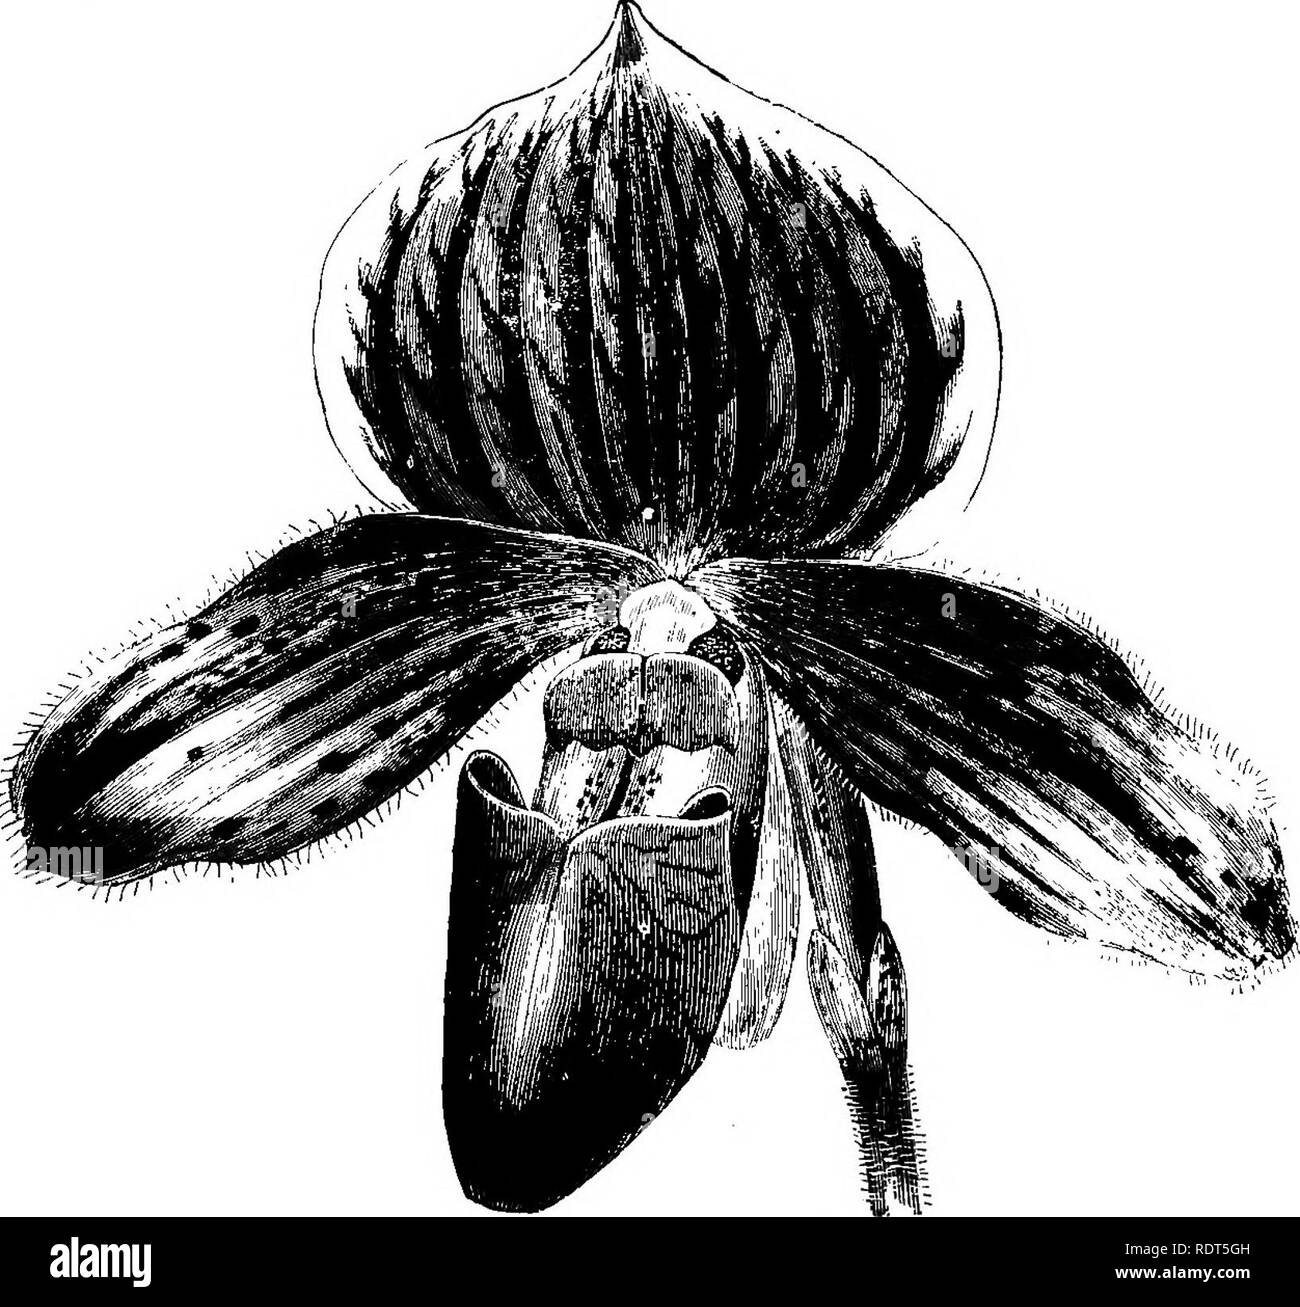 . The orchid-grower's manual, containing descriptions of the best species and varieties of orchidaceous plants in cultivation ... Orchids. 274: ORCHID-G&amp;OWEK S MANUAL. ciliate; pouch IJ inch in length and nearly 1 inch broad, maroon-purple in front veined longitudinally by a deeper shade. Staminode very large, ^ inch wide and f inch deep, of an intense deep purple-maroon.—Garden hyhrid. ¥m.—Jburn. of Hort., 1892, xxiv. p. 293, f. 50 ; Gavd. Cliron., 3rd ser., 1892, xi. p. 560, f. 82 ; Orchid Allmm,ii. t.. CYPEIPEDIUM LAWHEBEL. (From tla.a Journal of Ilortieulturc.') C. LAWRENCEANUM, Uchh. Stock Photo